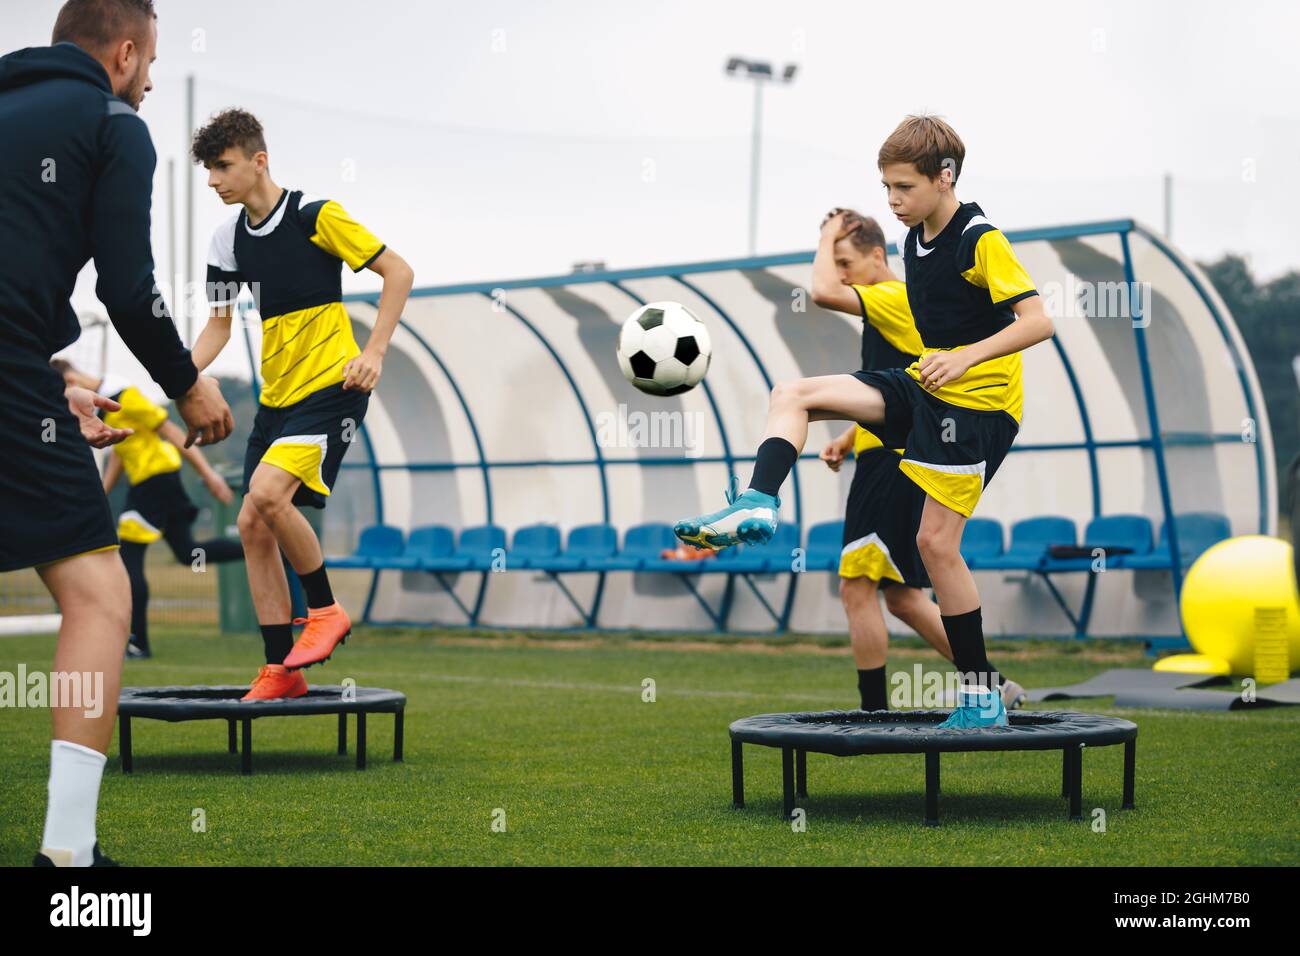 Football Club Players on Training Unit. Boys Running Fast on Soccer Practice. Coach Coaching Youth Football Team. Players Kicking Balls and Standing o Stock Photo